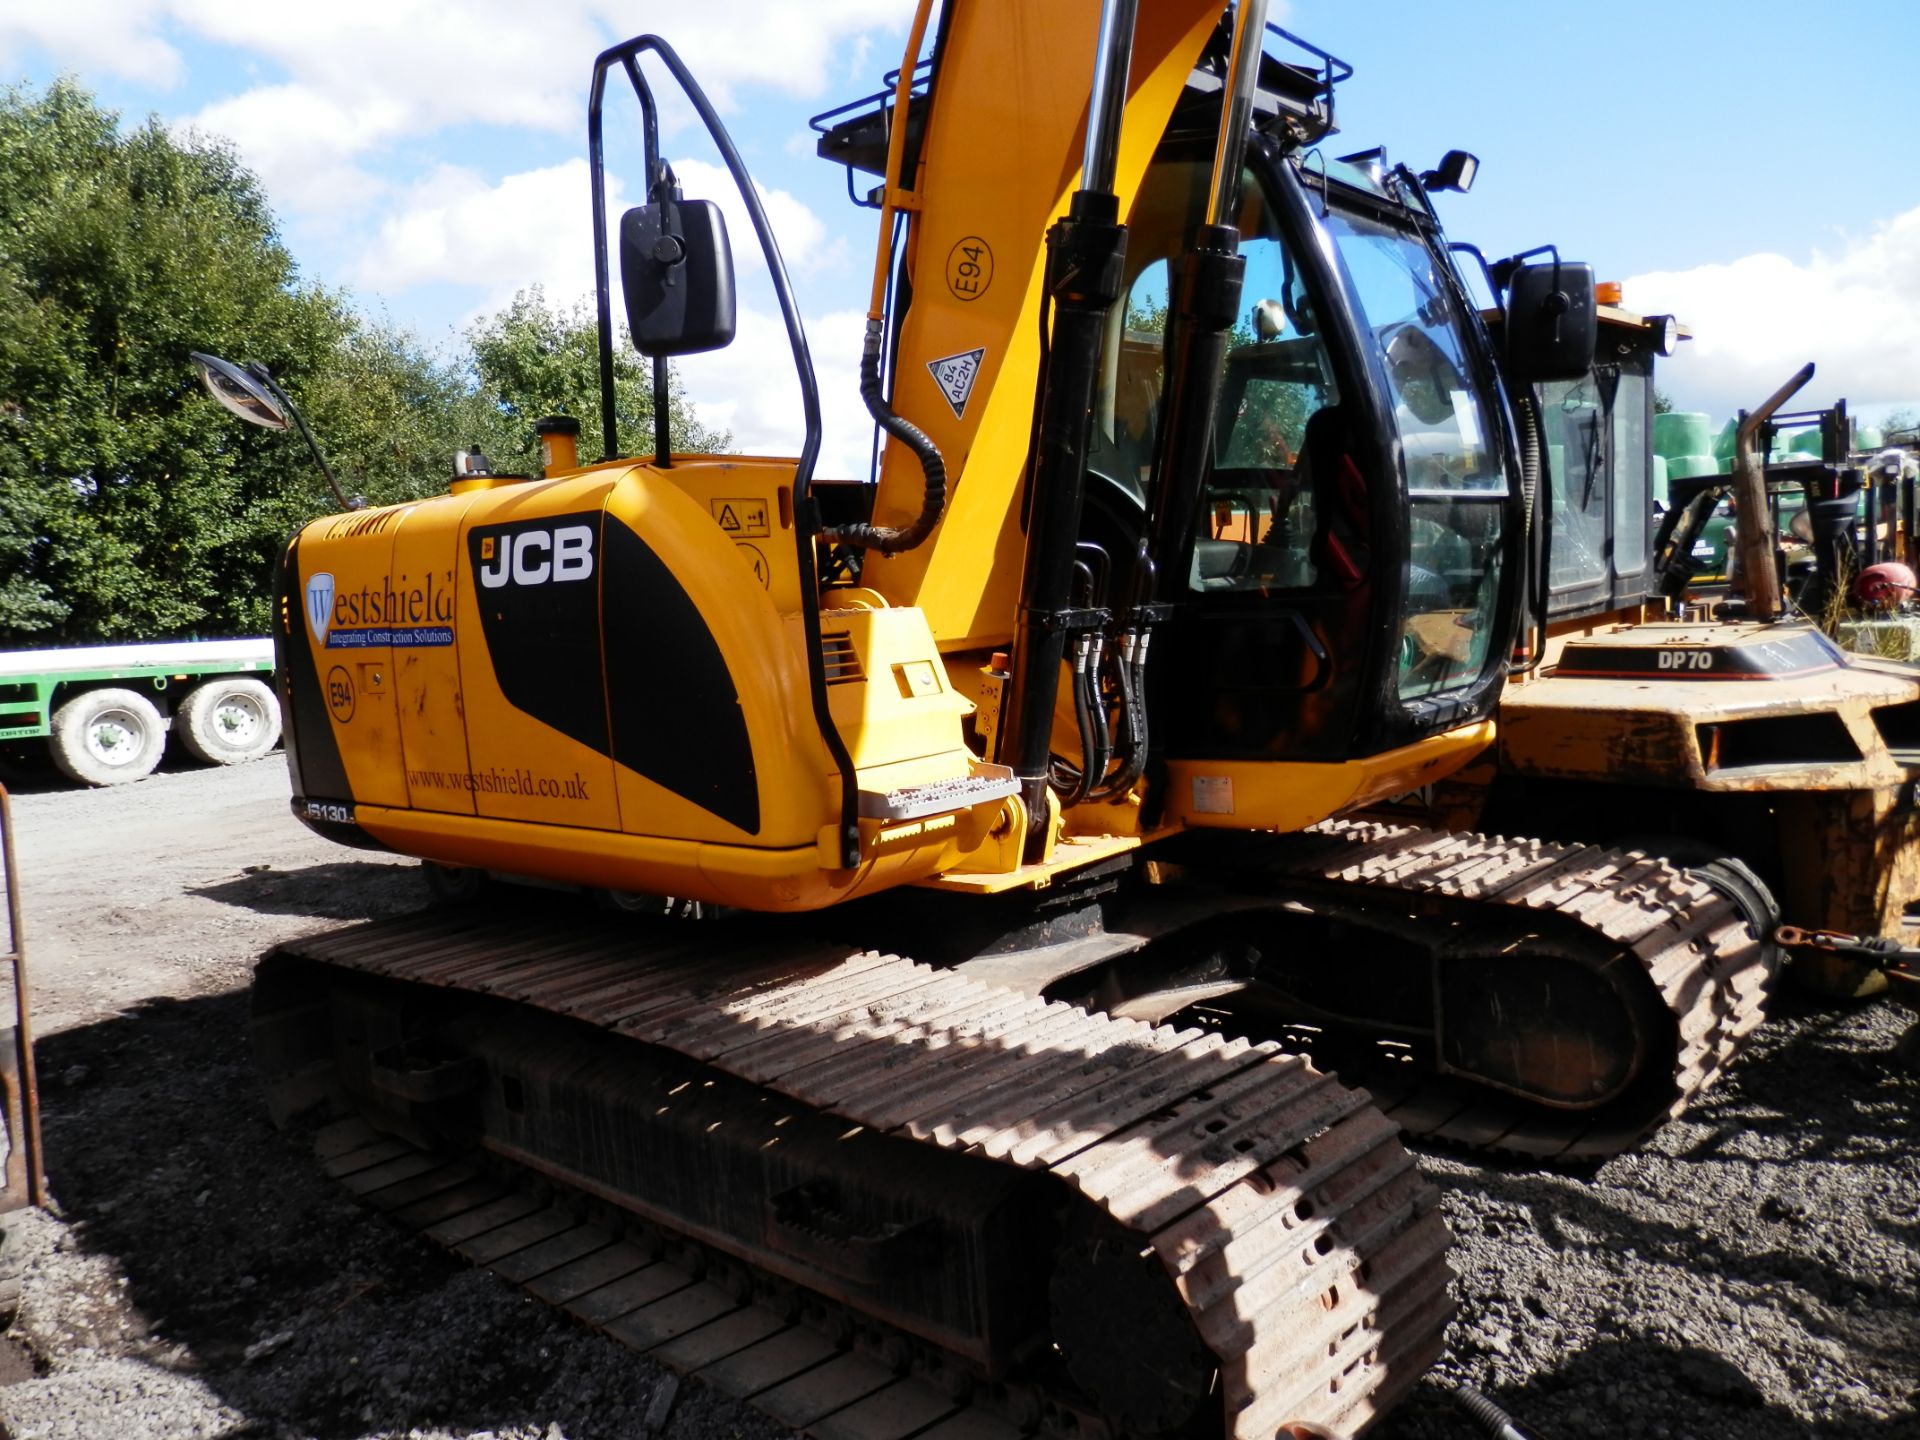 2010 JCBJS130 13.4 TONNE TRACKED DIGGER, ALL WORKING READY FOR WORK. 7806 WORKING HOURS.